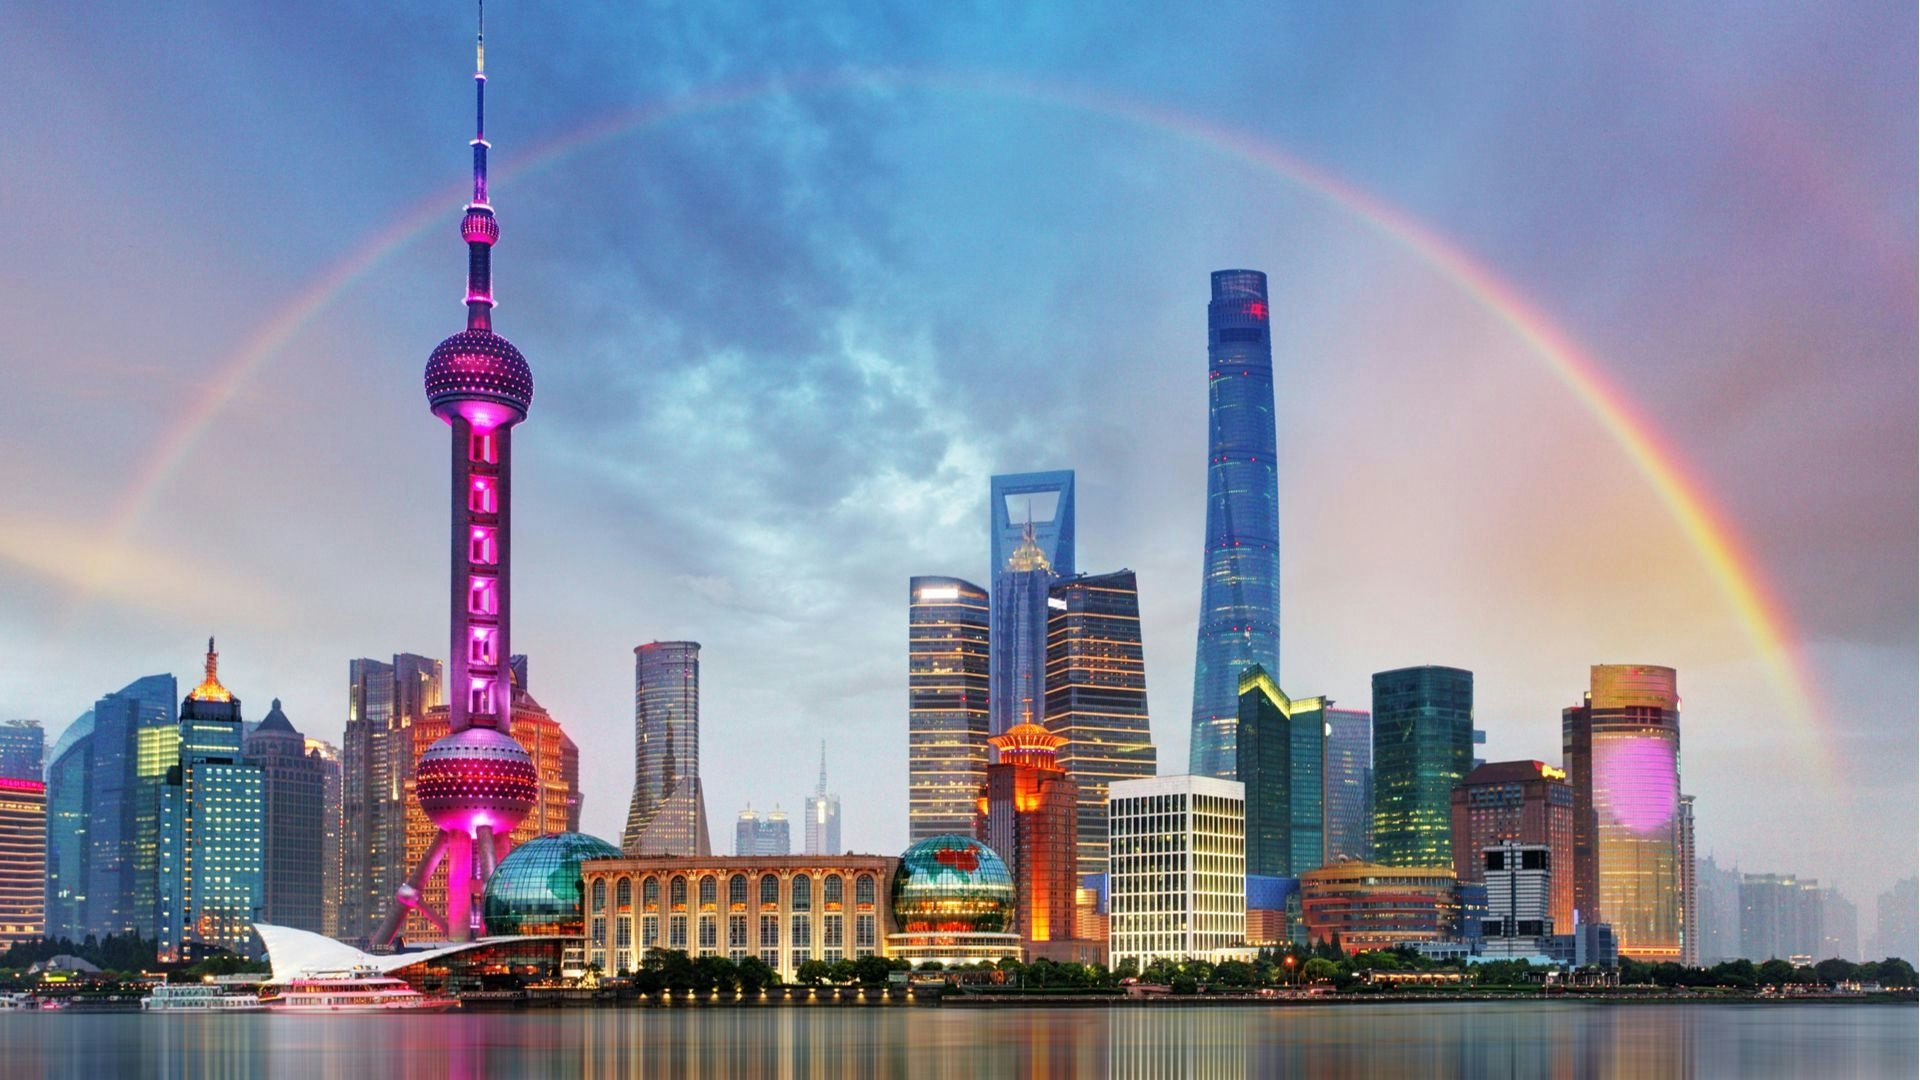 China is, on average, creating two new billionaires each week, according to a UBS report. Photo: Shutterstock